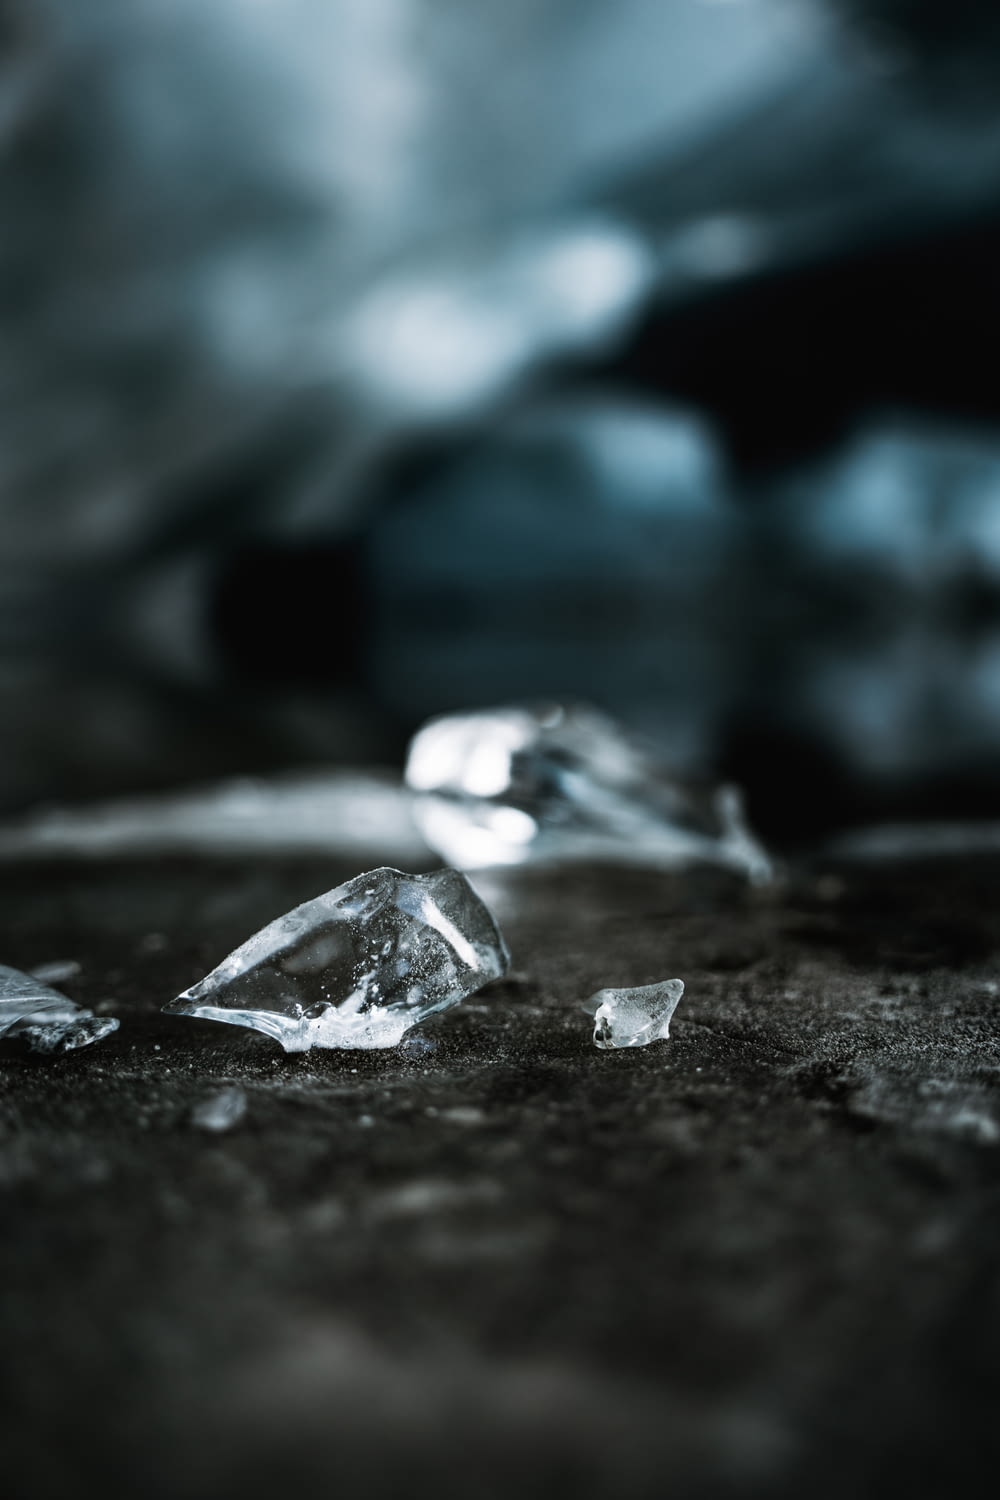 ice on black soil in close up photography